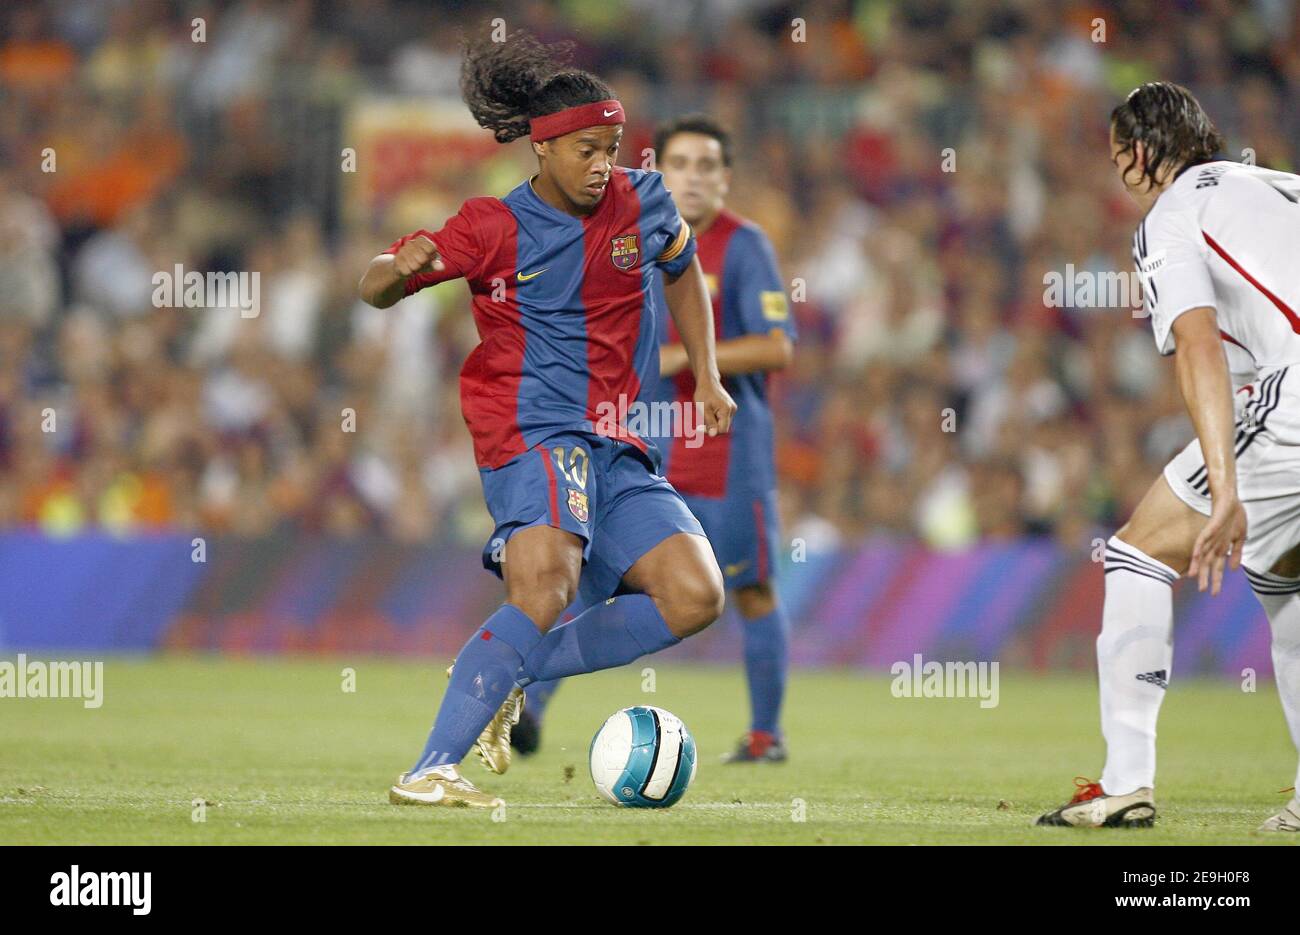 Barcelona's Ronaldinho in action during the Gamper trophy, FC Barcelona vs Bayern at Nou Camp, in Barcelona, Spain, on August 22, 2006. Barcelona won 4-0. Photo by Christian Liewig/ABACAPRESS.COM Stock Photo